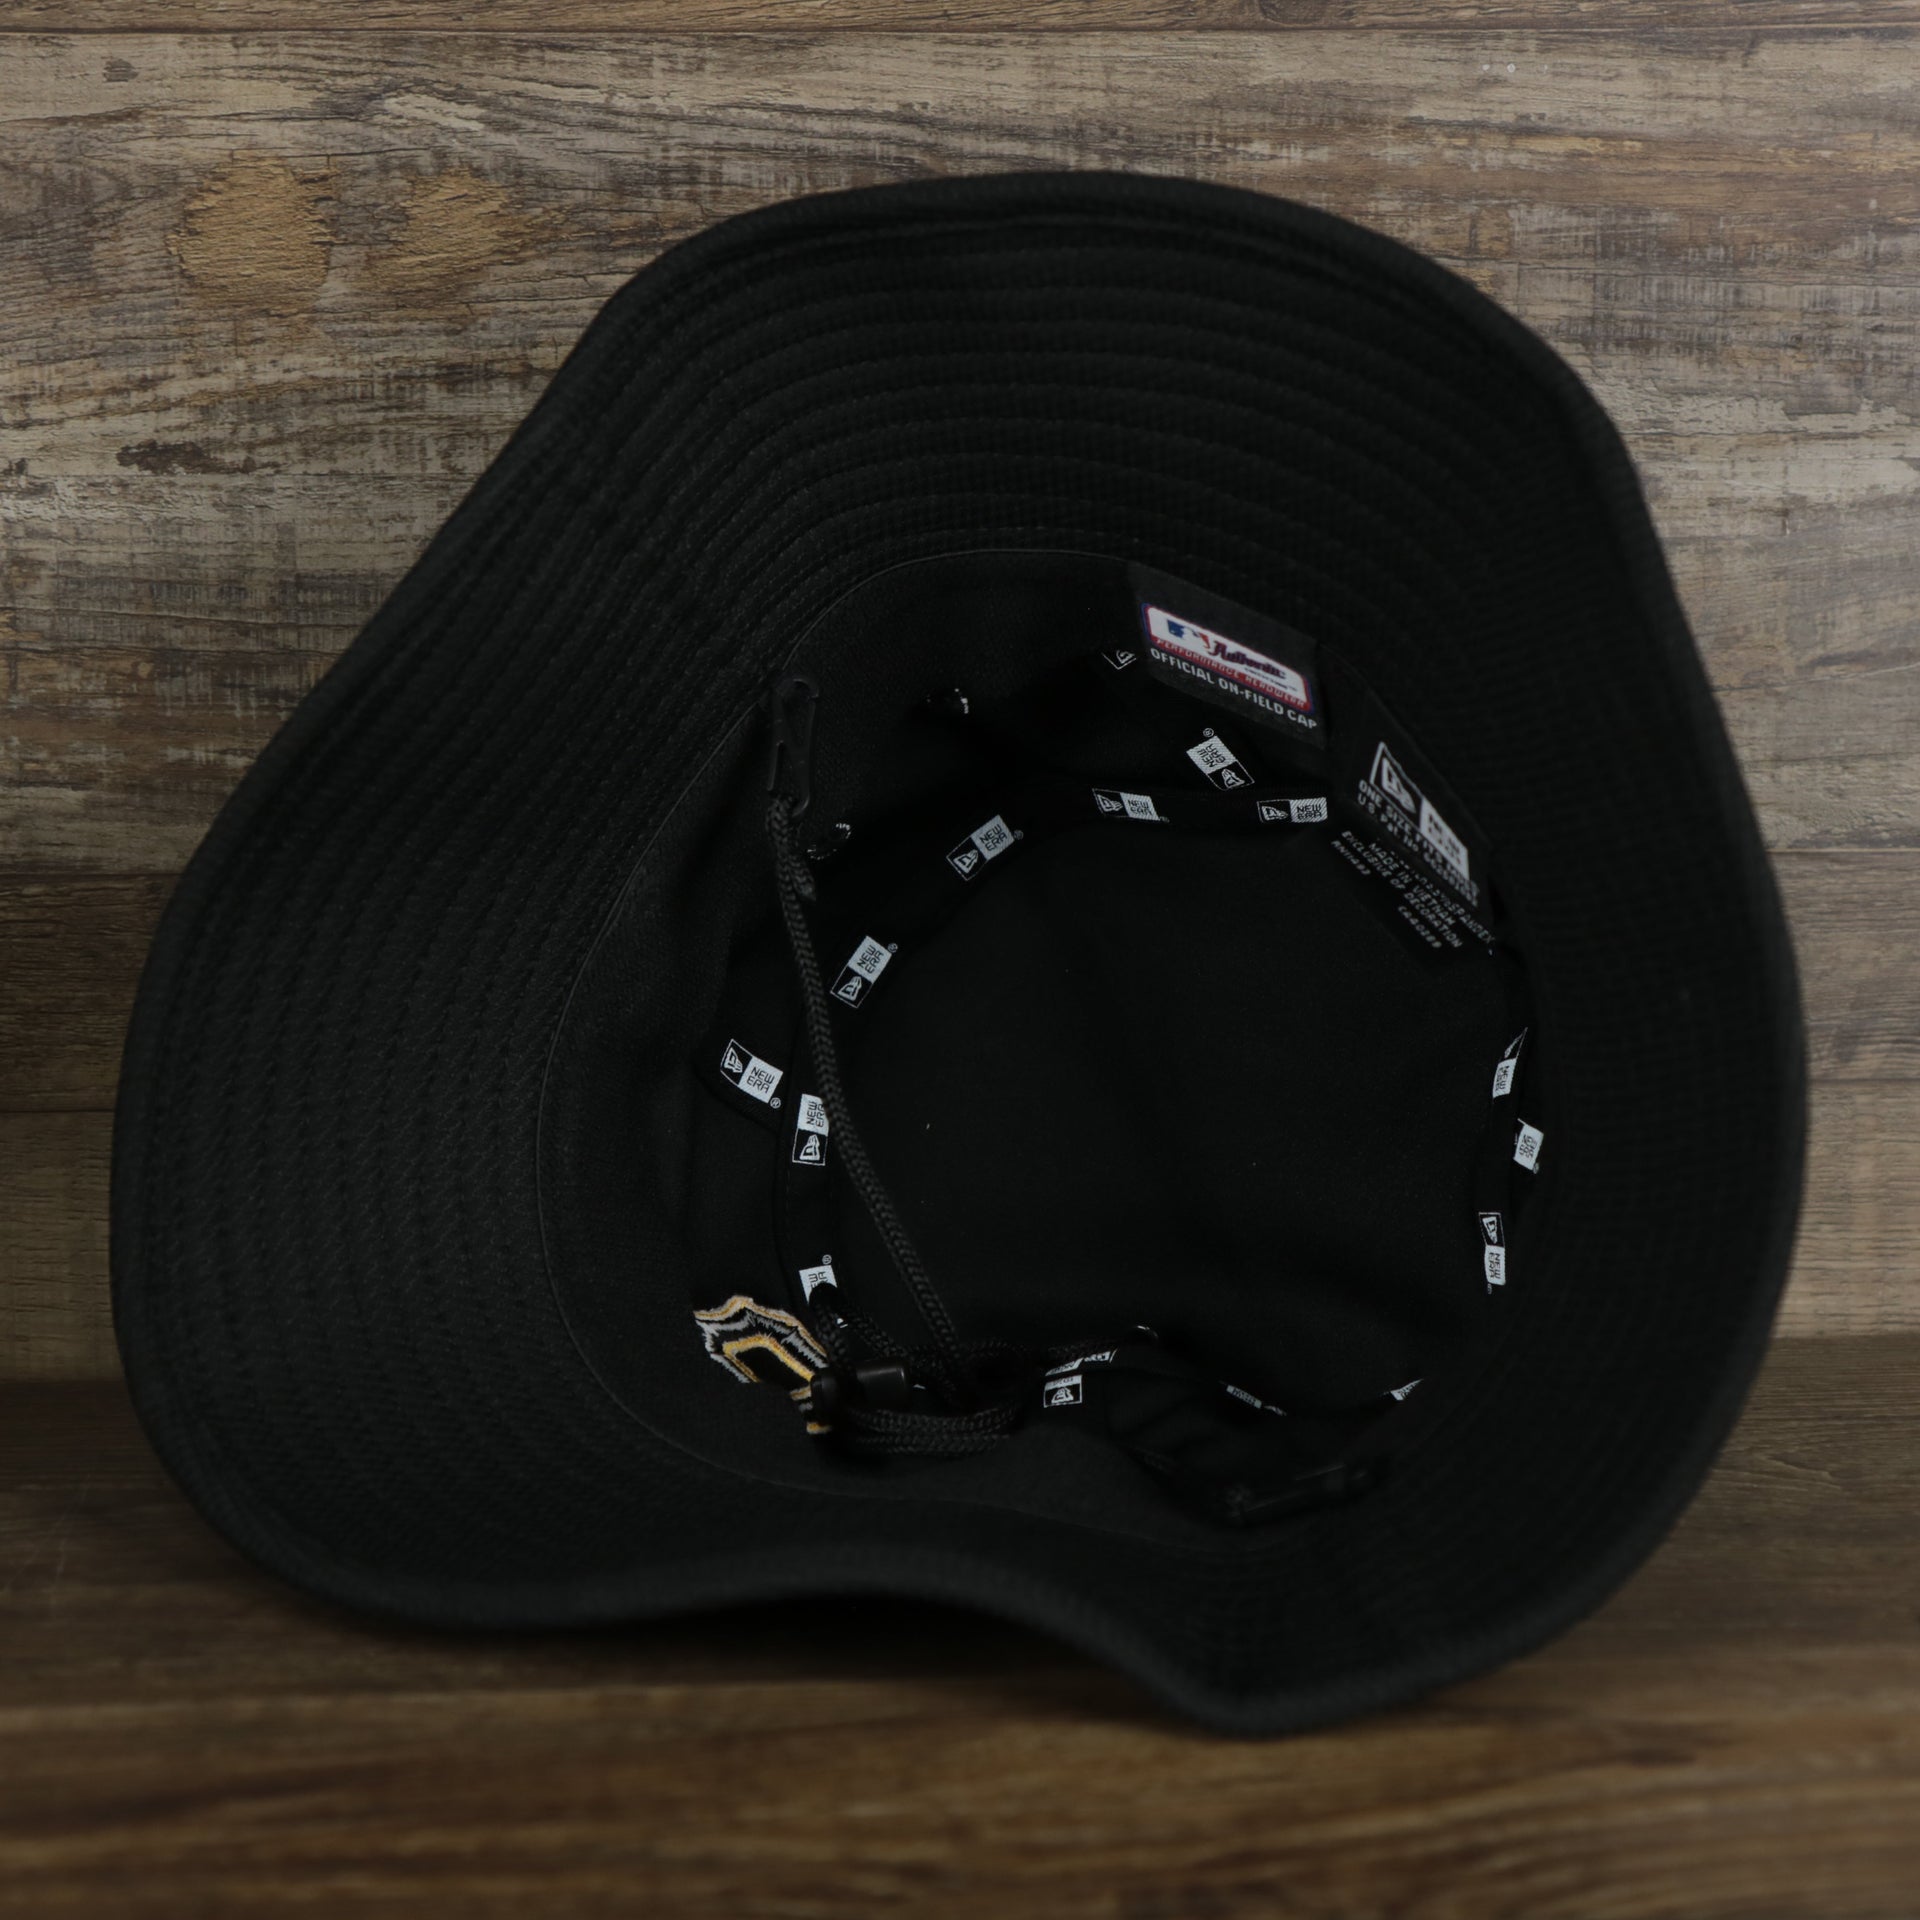 The underside of the Pittsburgh Pirates MLB 2022 Spring Training Onfield Bucket Hat